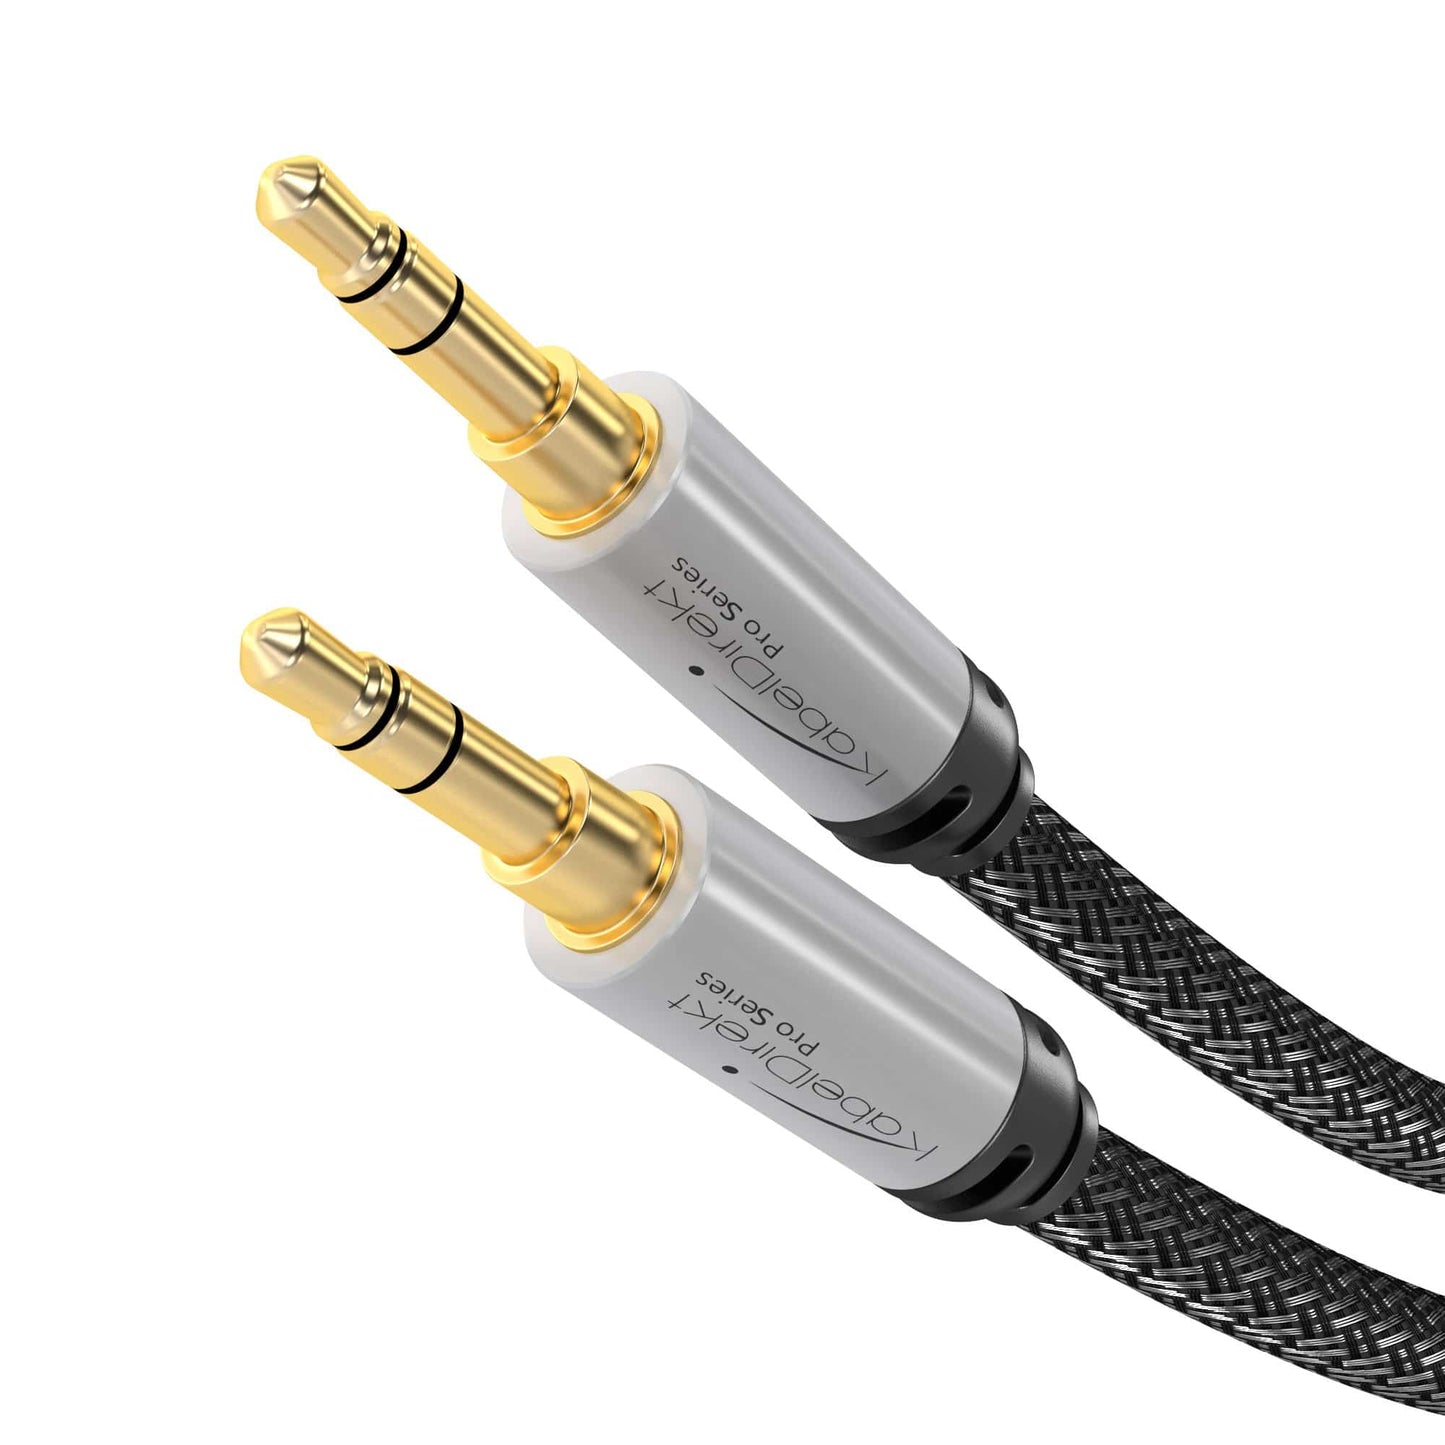 AUX audio & jack cable - designed to be indestructible & ideally suited for iPhones, iPads, smartphones, cars - silver